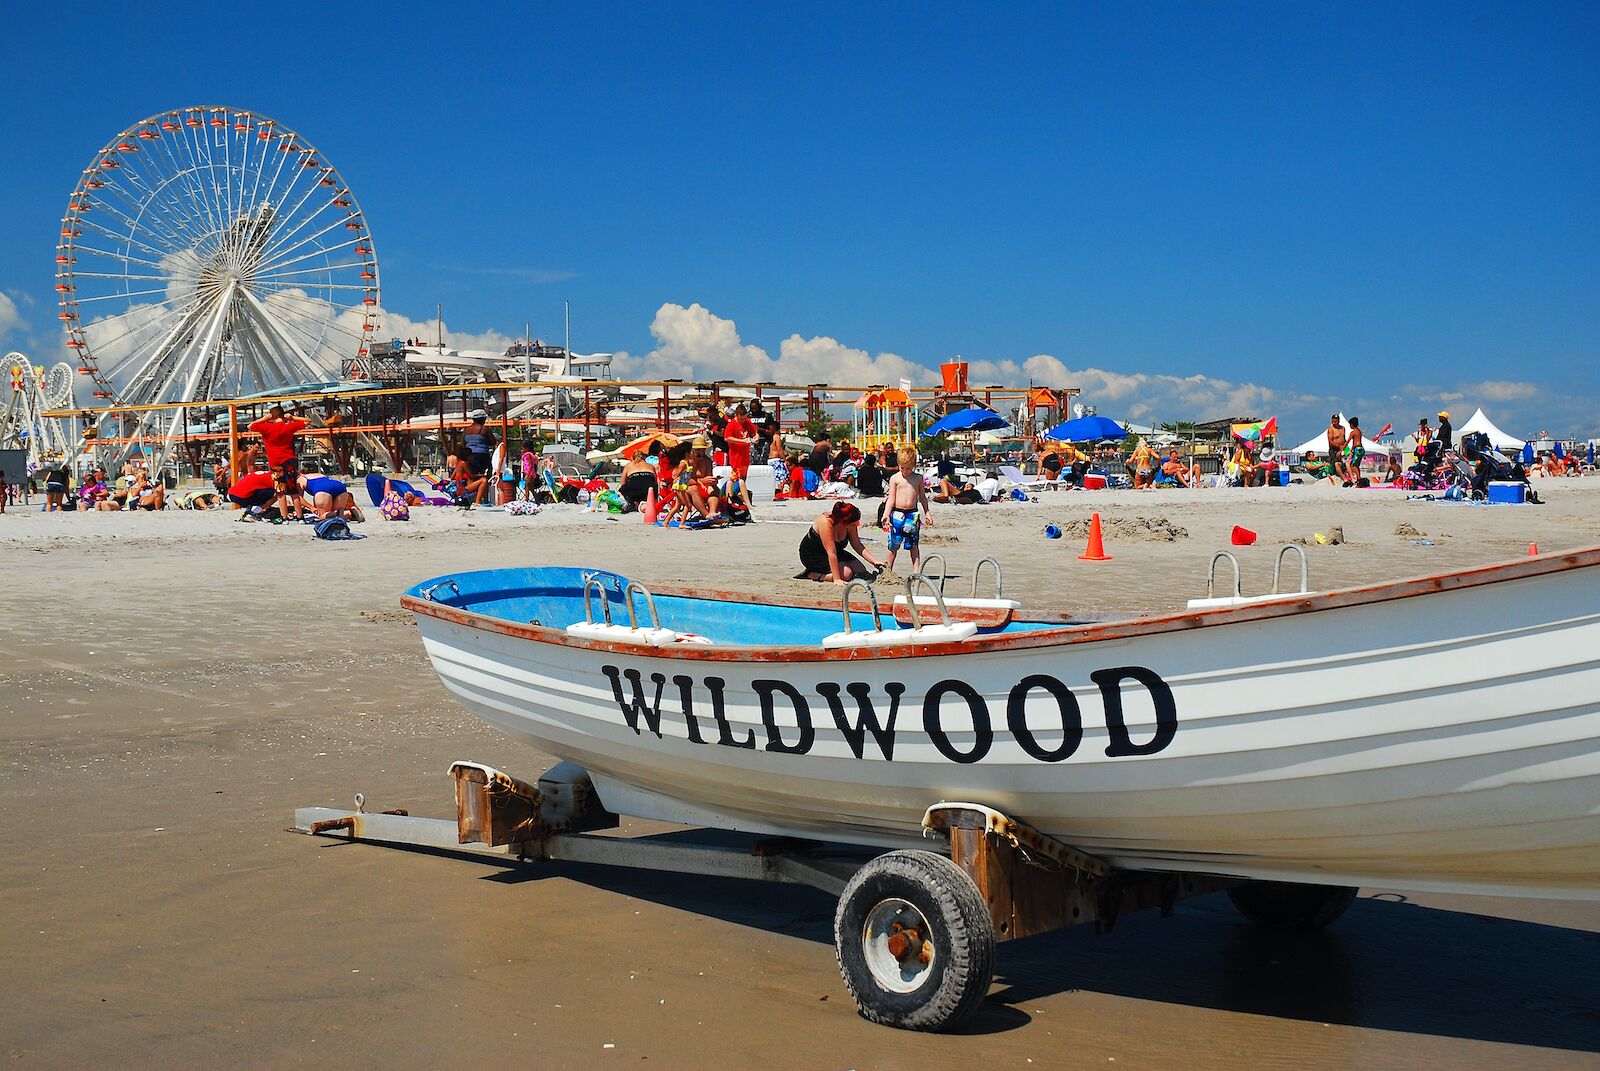 jersey shore beaches crowded wildwood beach with ferris wheel in the background